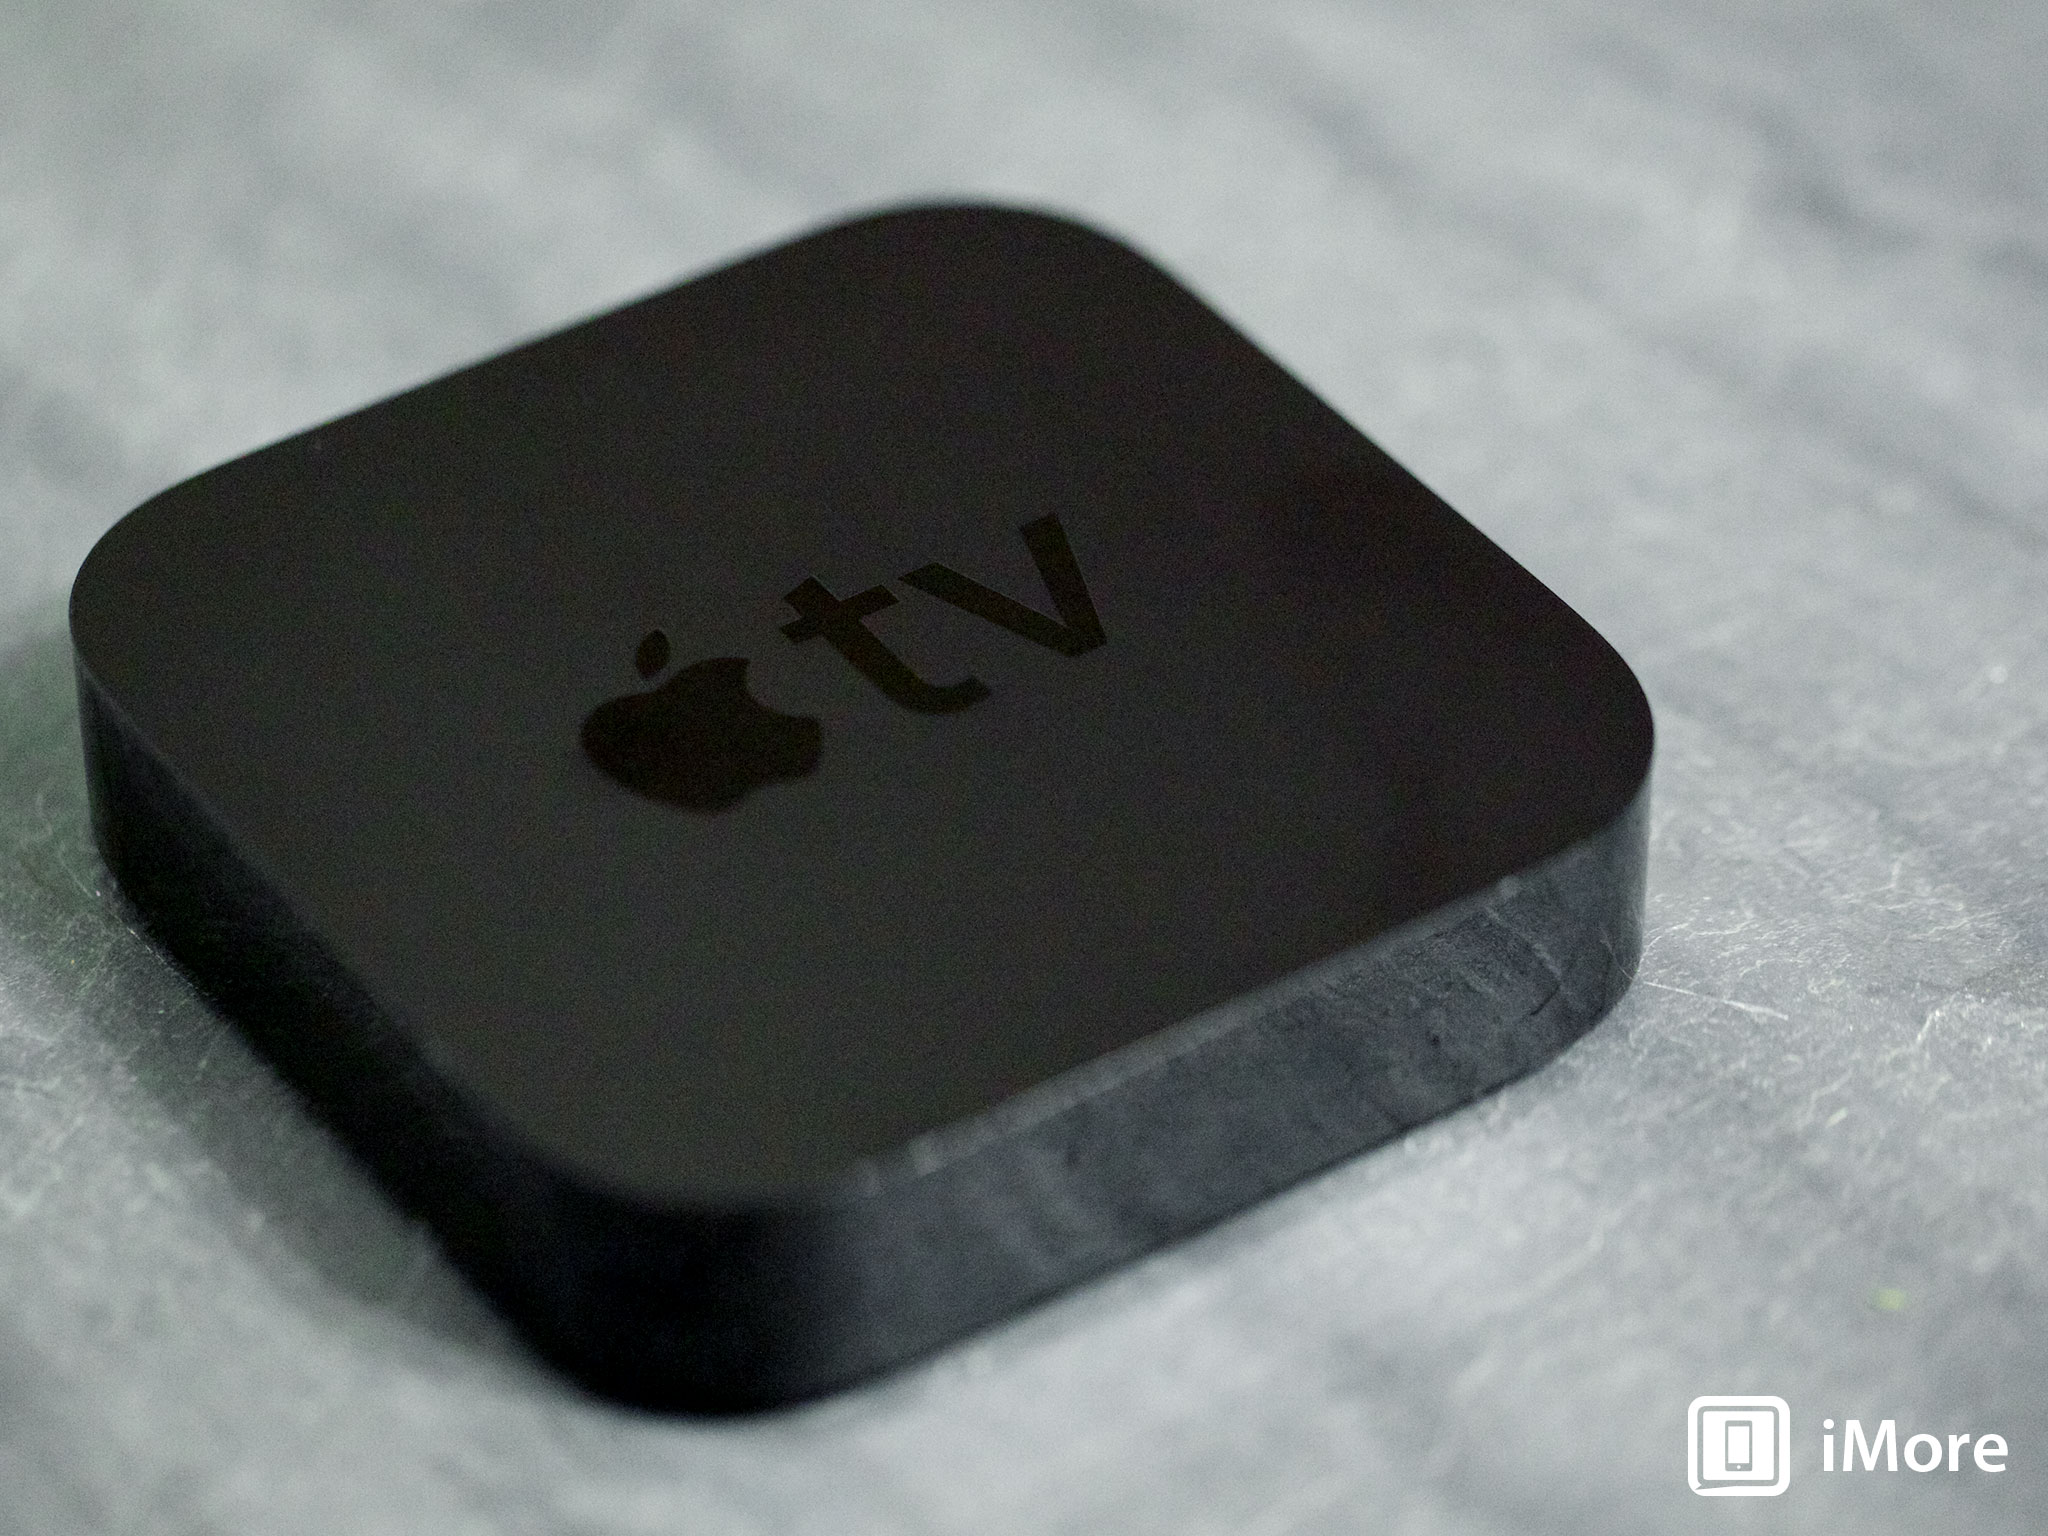 Apple TV gets Watch ABC, Crackle, and Bloomberg and more